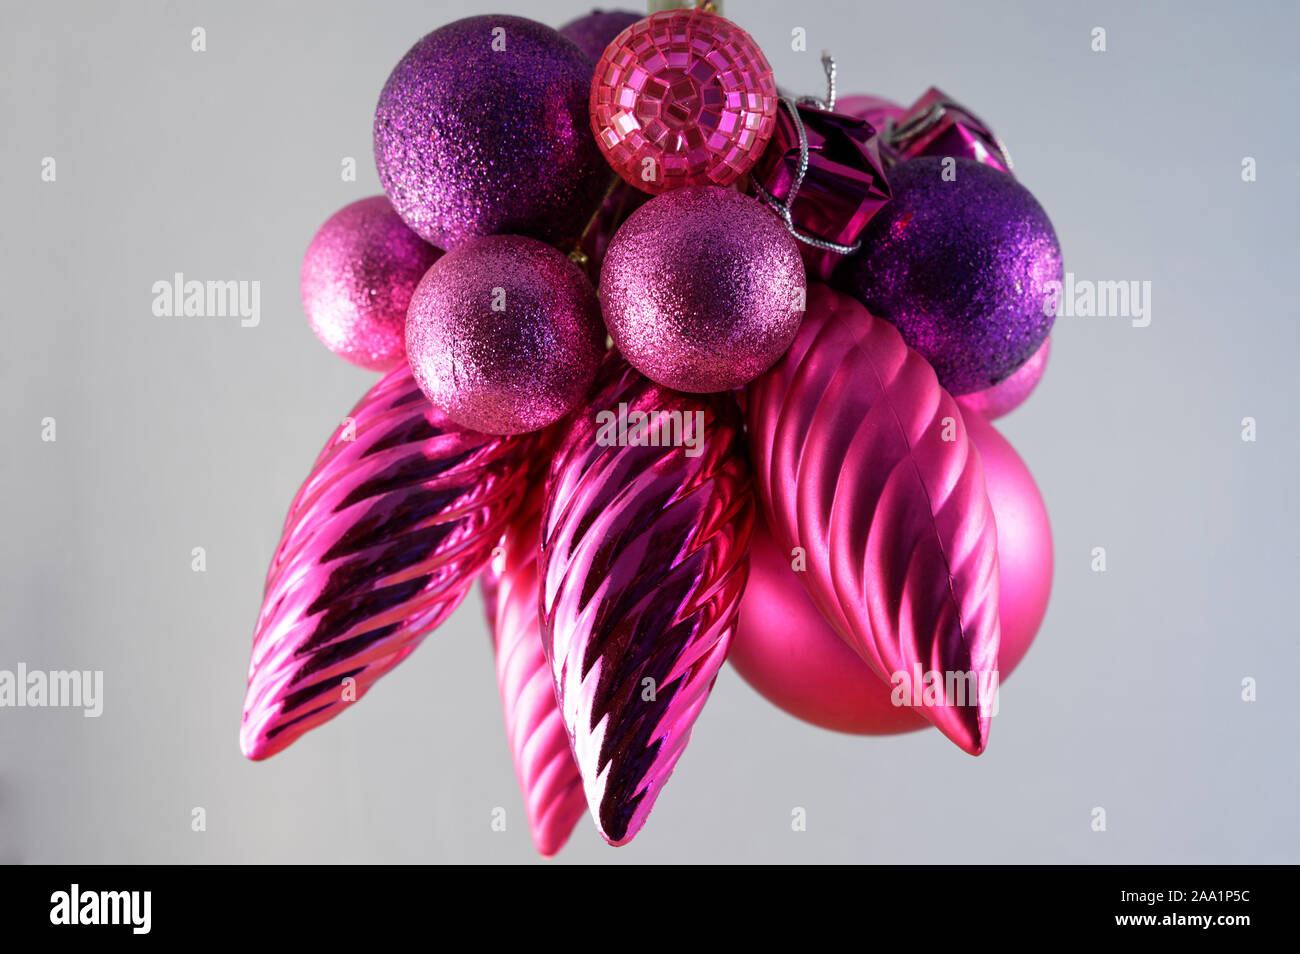 Purple, pink and red Christmas tree decorations Stock Photo